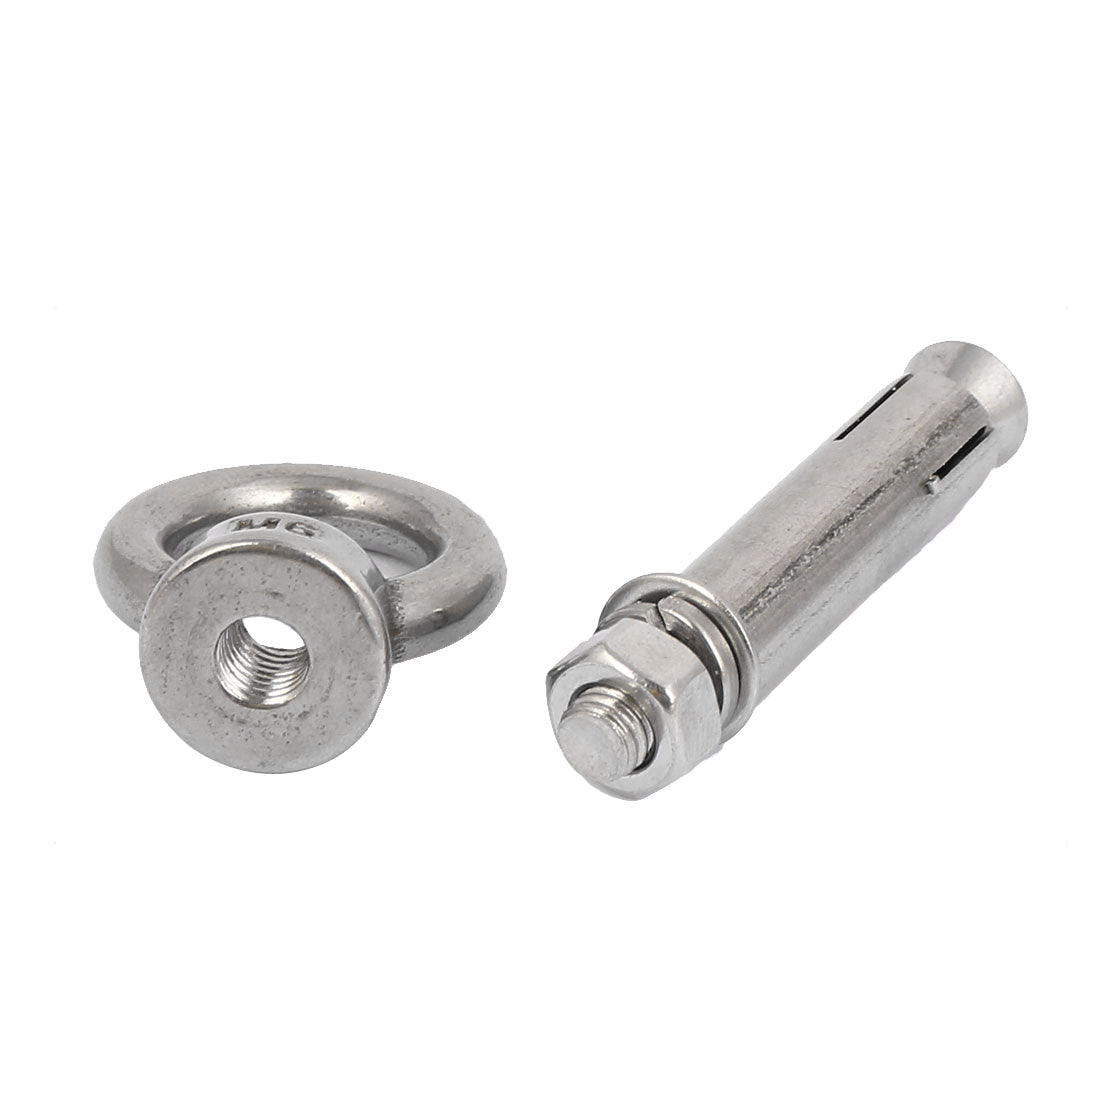 uxcell Uxcell M6x50mm Wall 304 Stainless Steel Expansion Screws Closed Hook Shield Bolts 2pcs